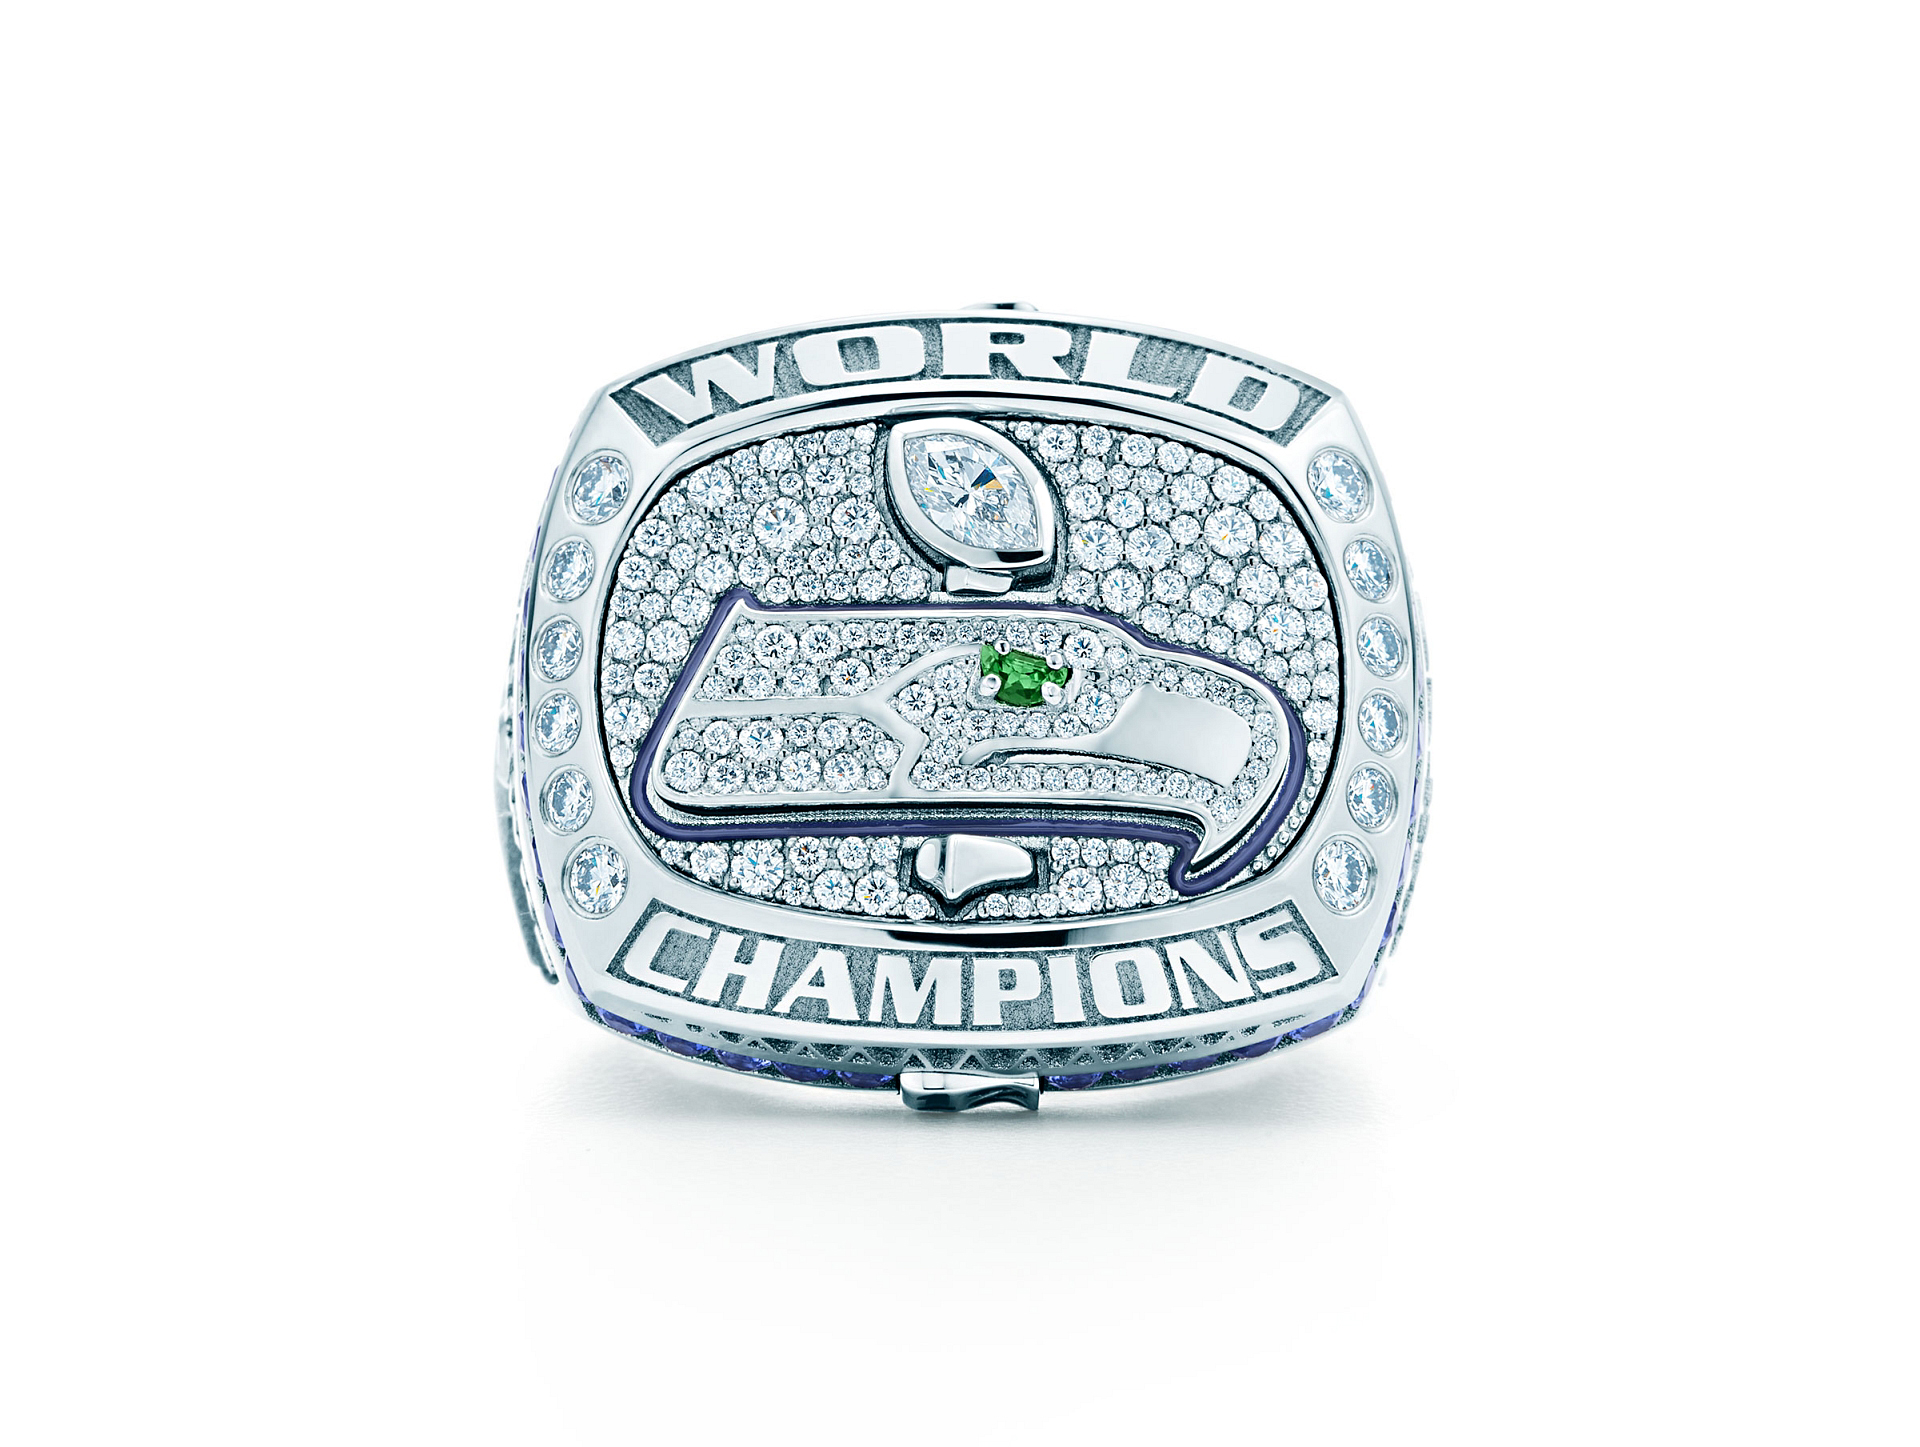 The Seattle Seahawks Super Bowl ring commemorates the team's landslide win against the Denver Broncos. Photo courtesy the Seattle Seahawks.